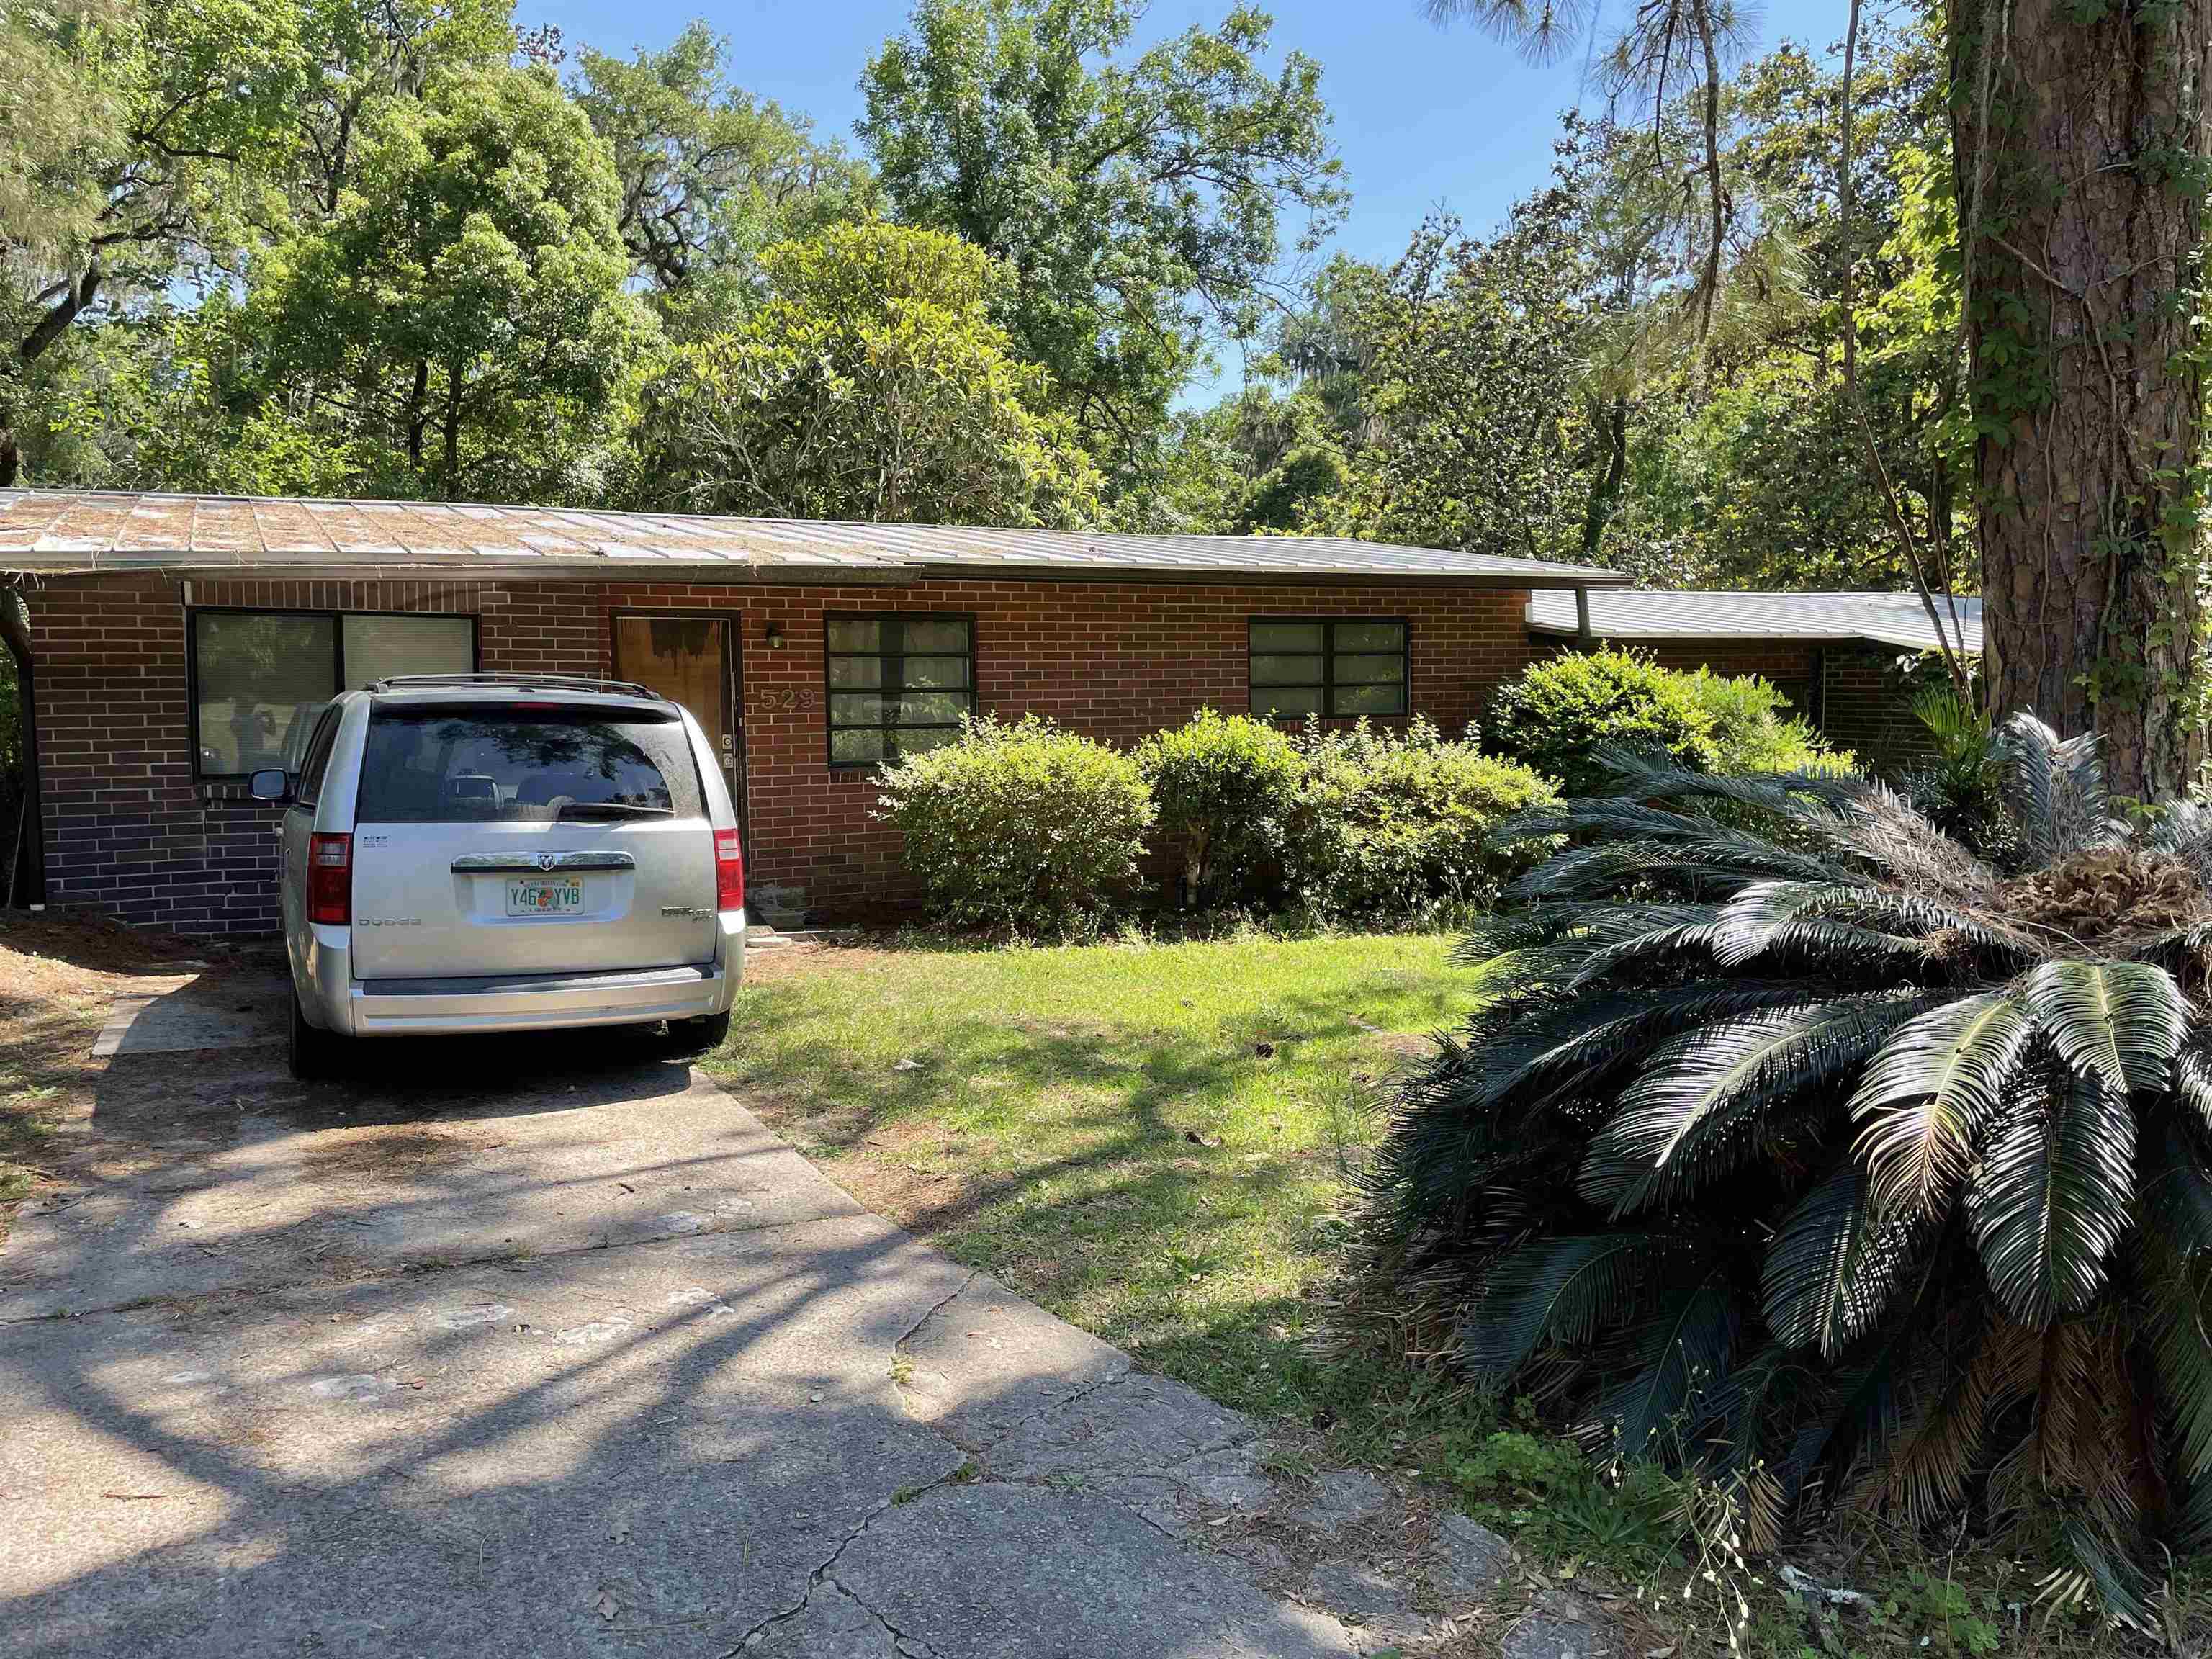 Back on the market with a PRICE IMPROVEMENT, adding even more value! Bring your investors! $45k Potential Gross Net Income. This is the rarest one of all! All brick duplex with a separate apartment underneath, in PRIME Myers Park! Walk to Cascades Park and downtown within minutes. Close to FSU, FAMU, Greenwise, Gaines street shops, and more..... Each unit of the duplex is 3/2, while the apartment underneath is a 2/2. One of the duplex unit's hallway bathroom has just been remodeled. Super well maintained and has been cared for under property management. Roof 2017. All units are under rented, with leases expiring soon. Adjoining parcel with similar duplex, as well as a tiny home rather than an apartment below that has just been currently leased at market rent, also for sale. Don't miss this opportunity to have a prime investment location in the heart of Tallahassee. Bring your offers! Pictures are older and limited. Newer ones will be coming soon. All measurements are approximate and should be independently reviewed and verified for accuracy.